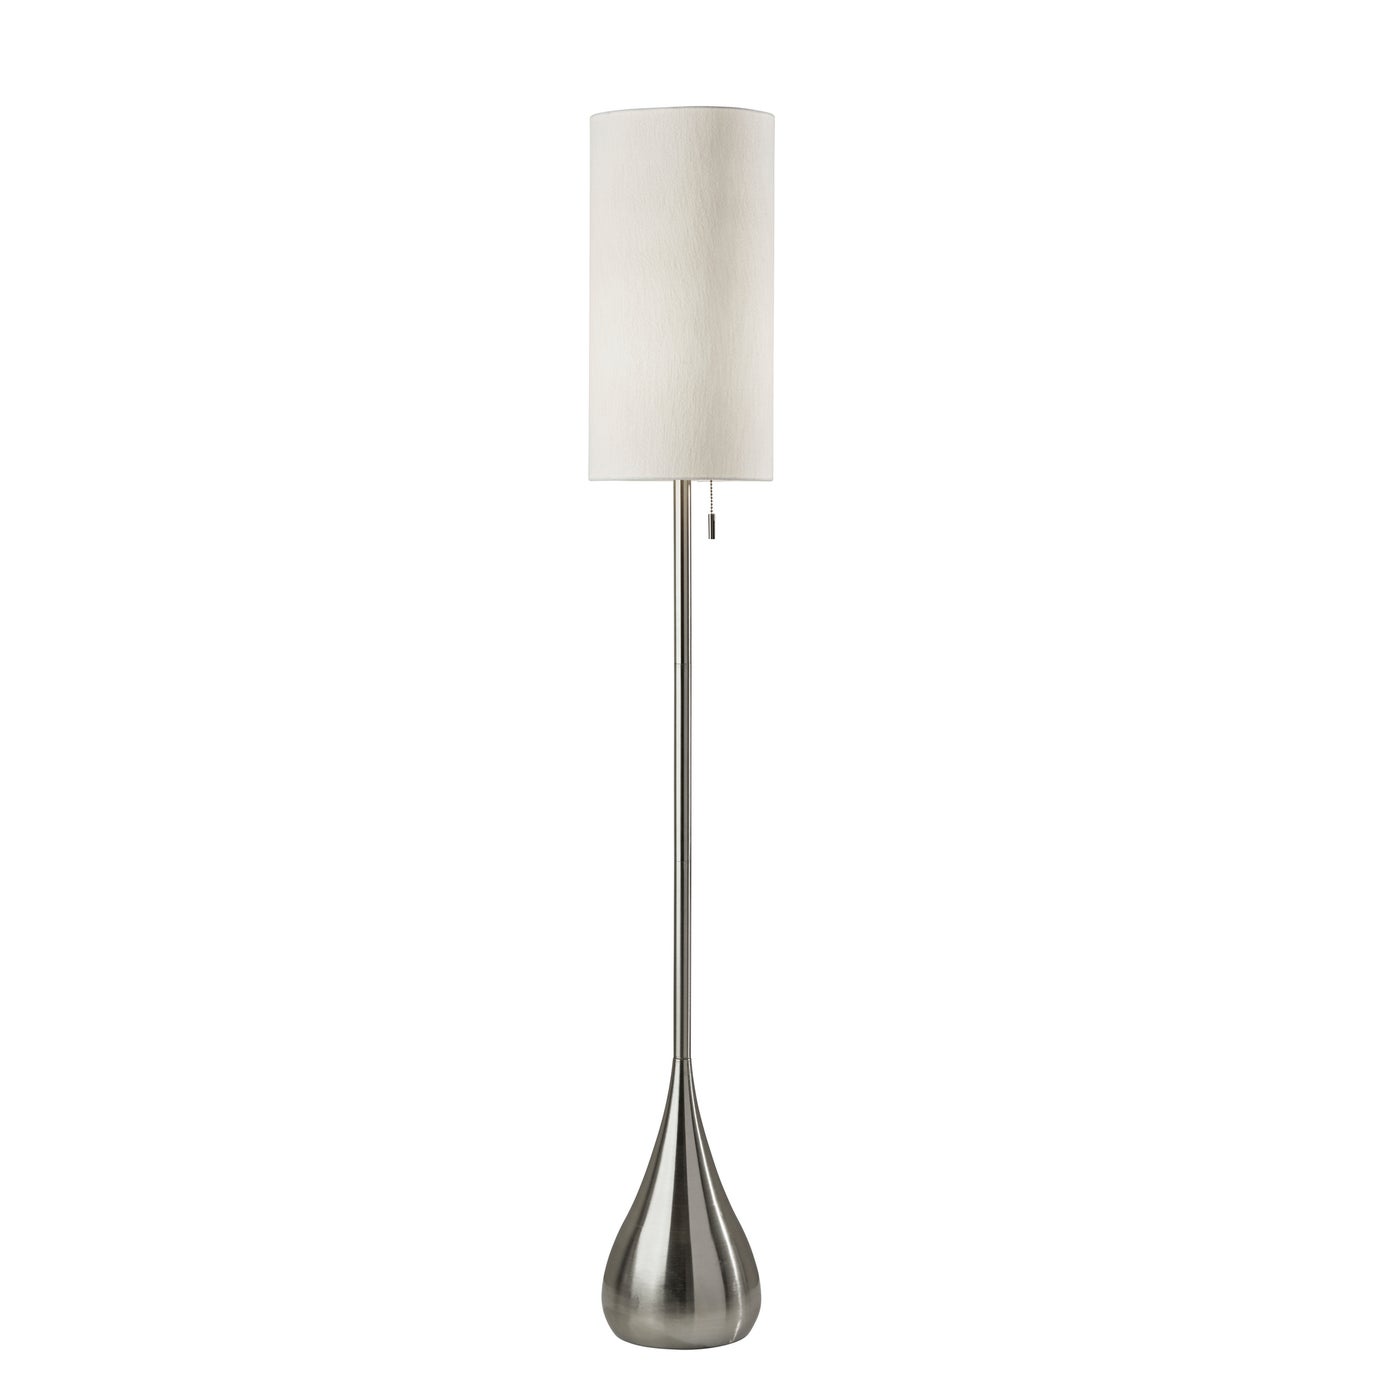 Adesso Home - 1537-22 - Floor Lamp - Christina - Brushed Steel